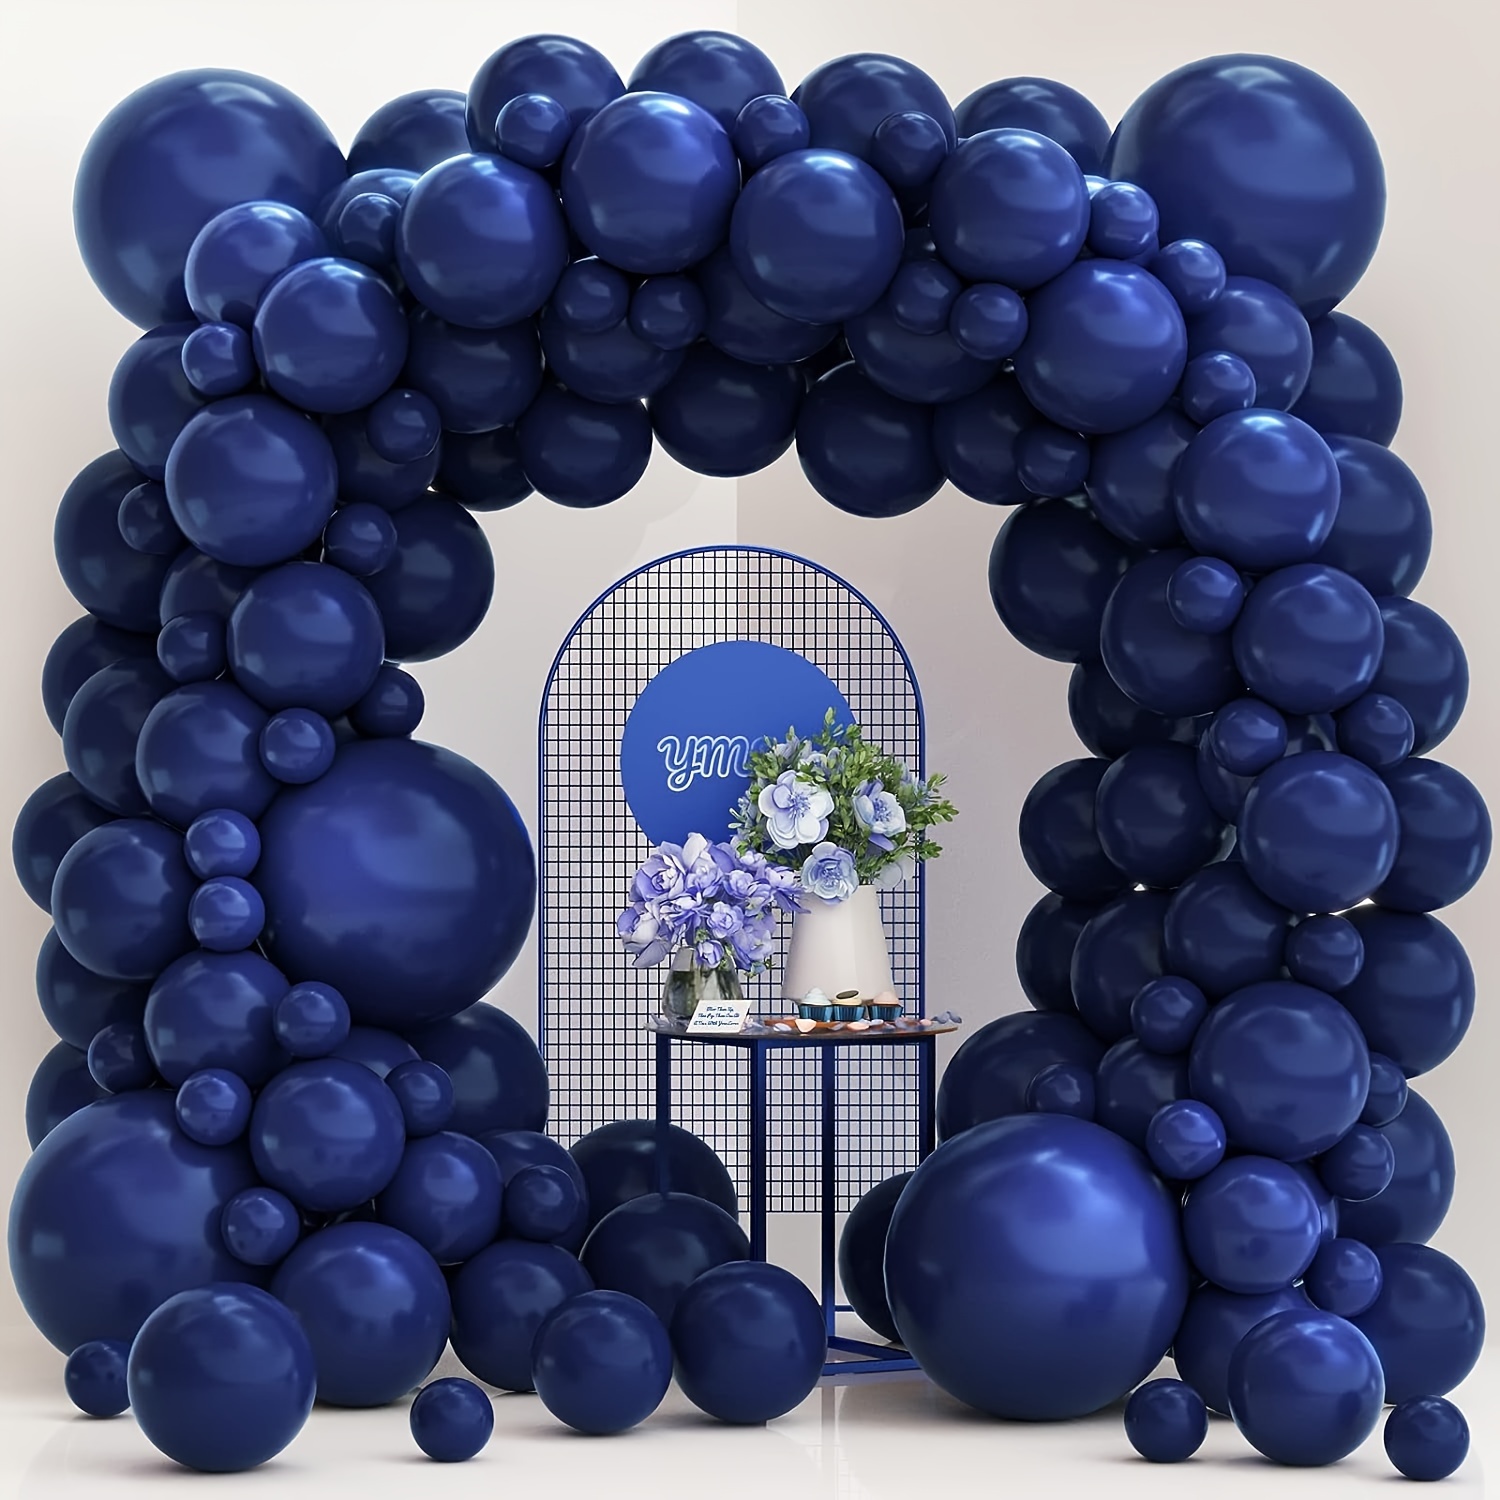 

121pcs Premium Blue Balloon Garland Kit For Weddings, Birthdays, Anniversaries & More - Universal Holiday & Special Occasion Decor Set With Dot Glue & Fixtures - Suitable For Ages 8 & Up